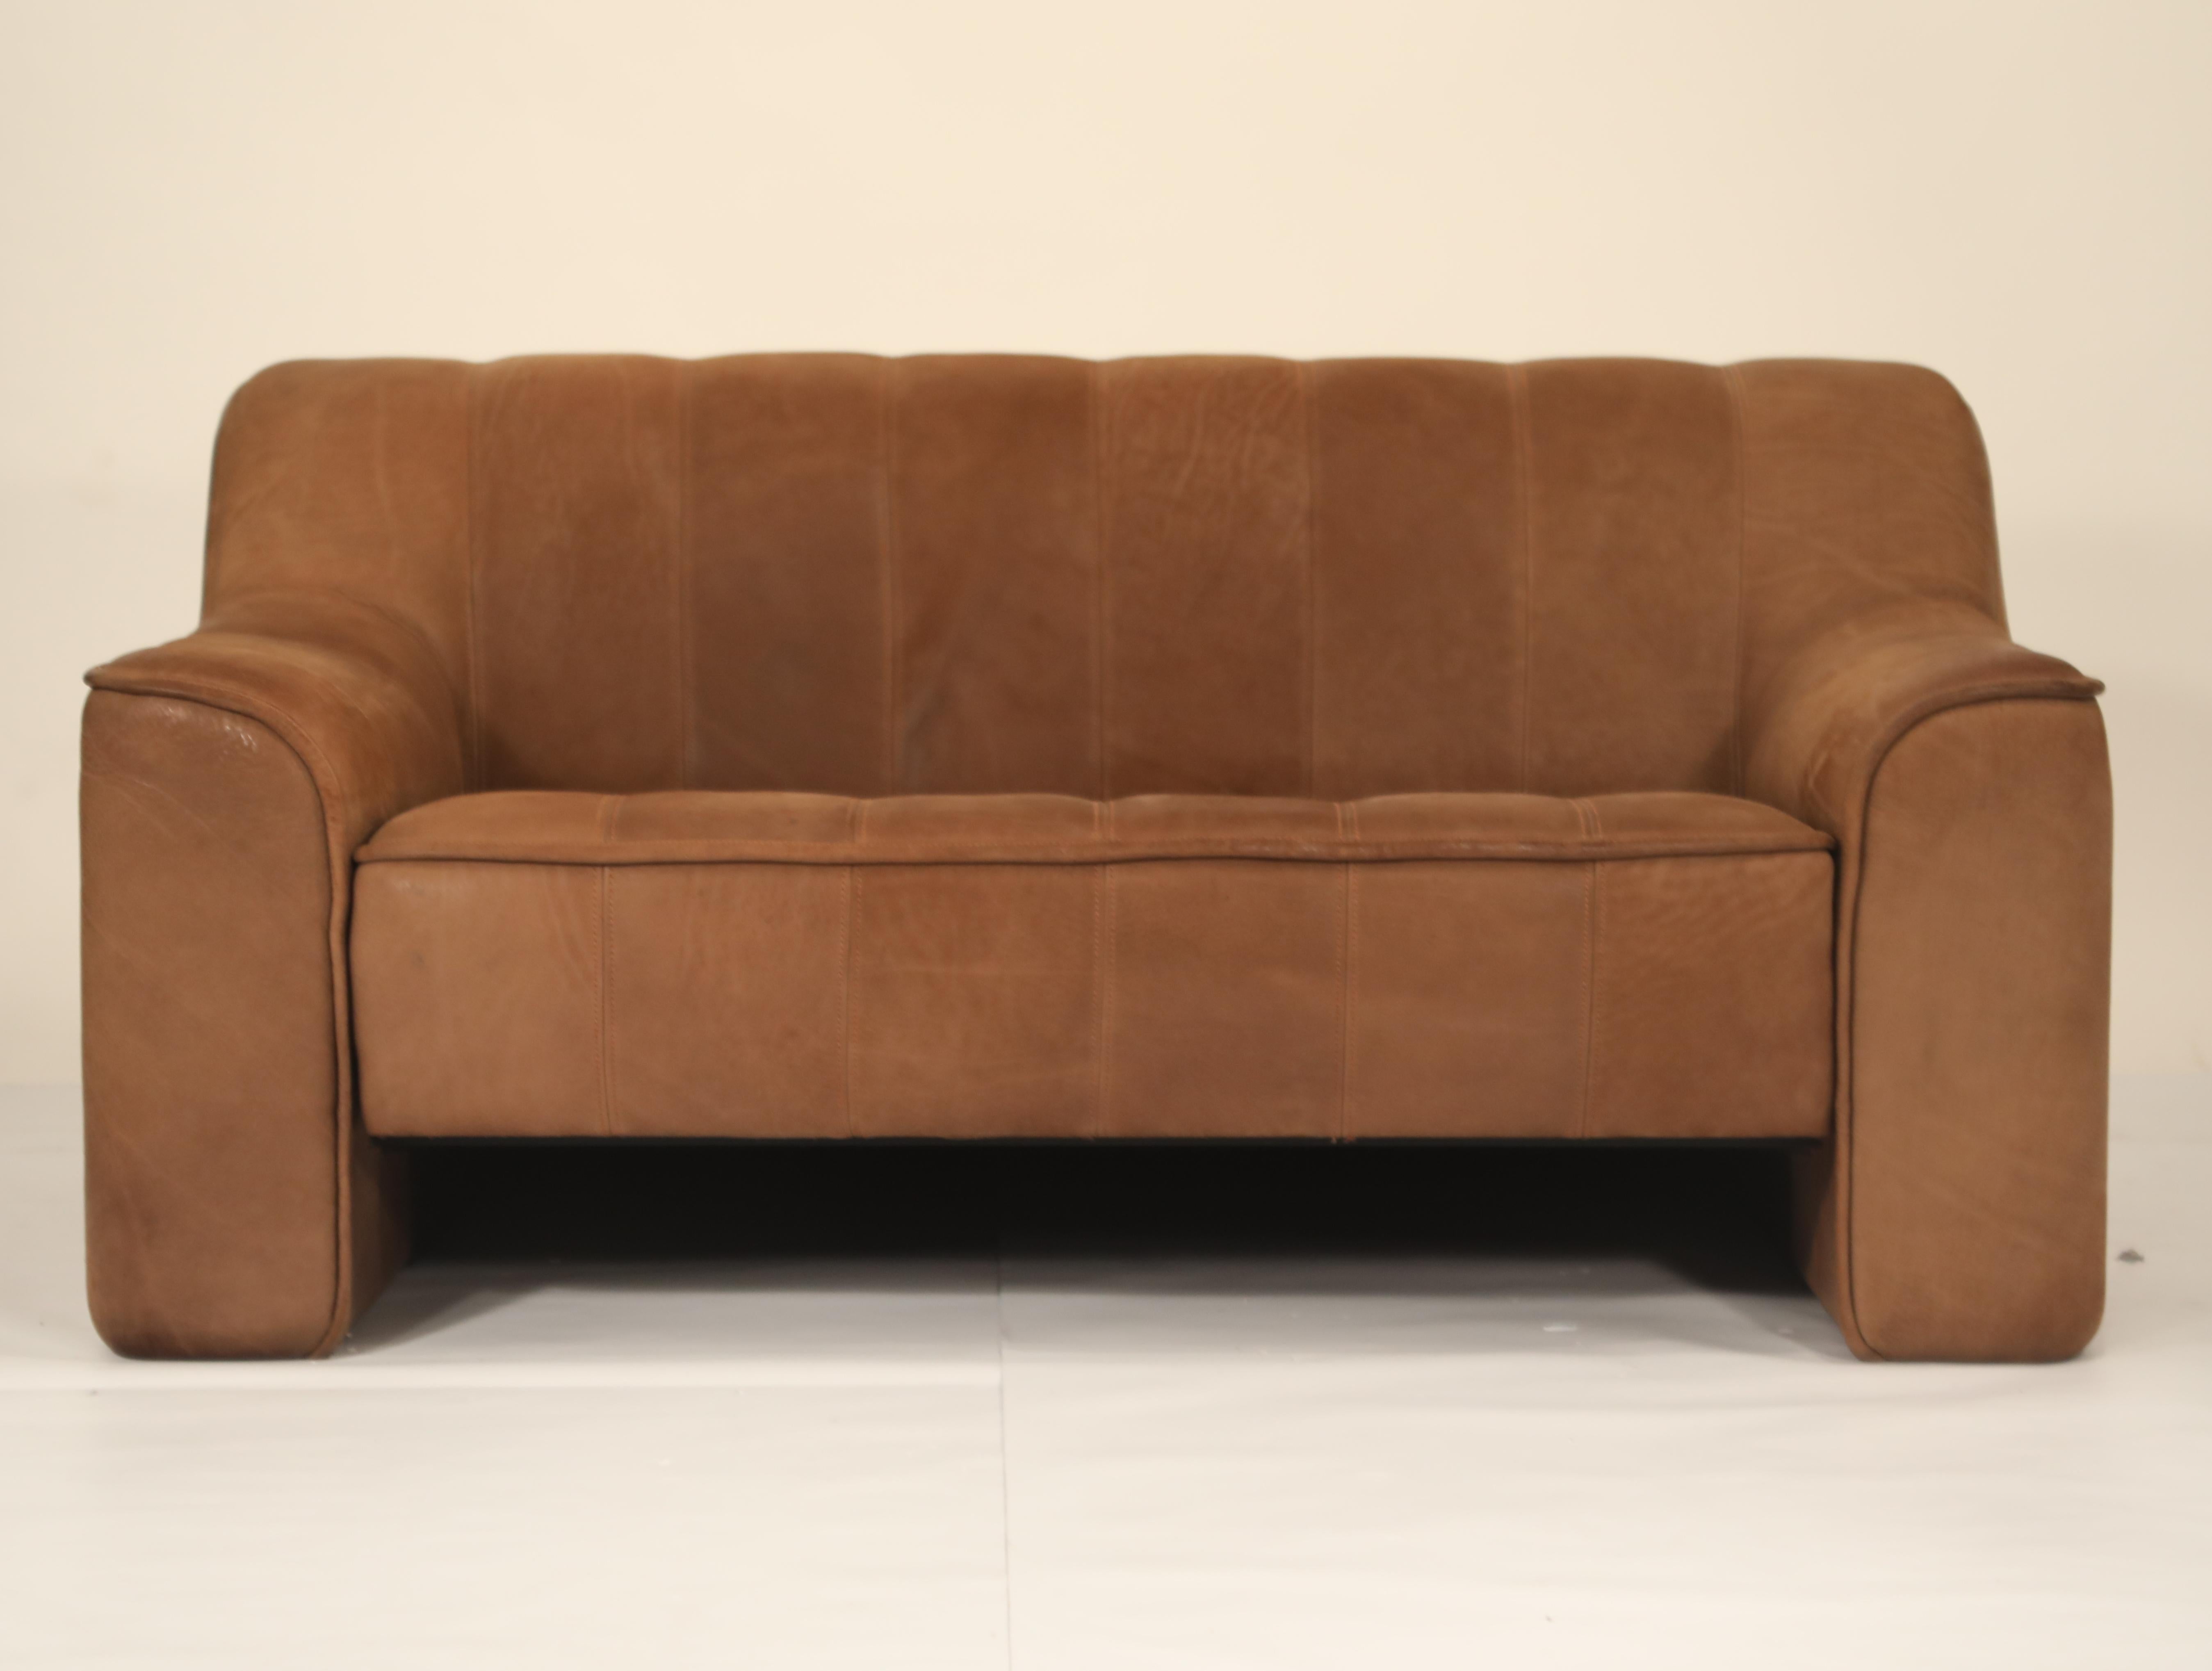 This incredible channel-tufted adjustable DS-44 settee sofa by De Sede, the leading Swiss design company since the 1960s, is skillfully crafted in Switzerland from thick, heavy, quality Buffalo leather. 

The beautiful patina and vertical